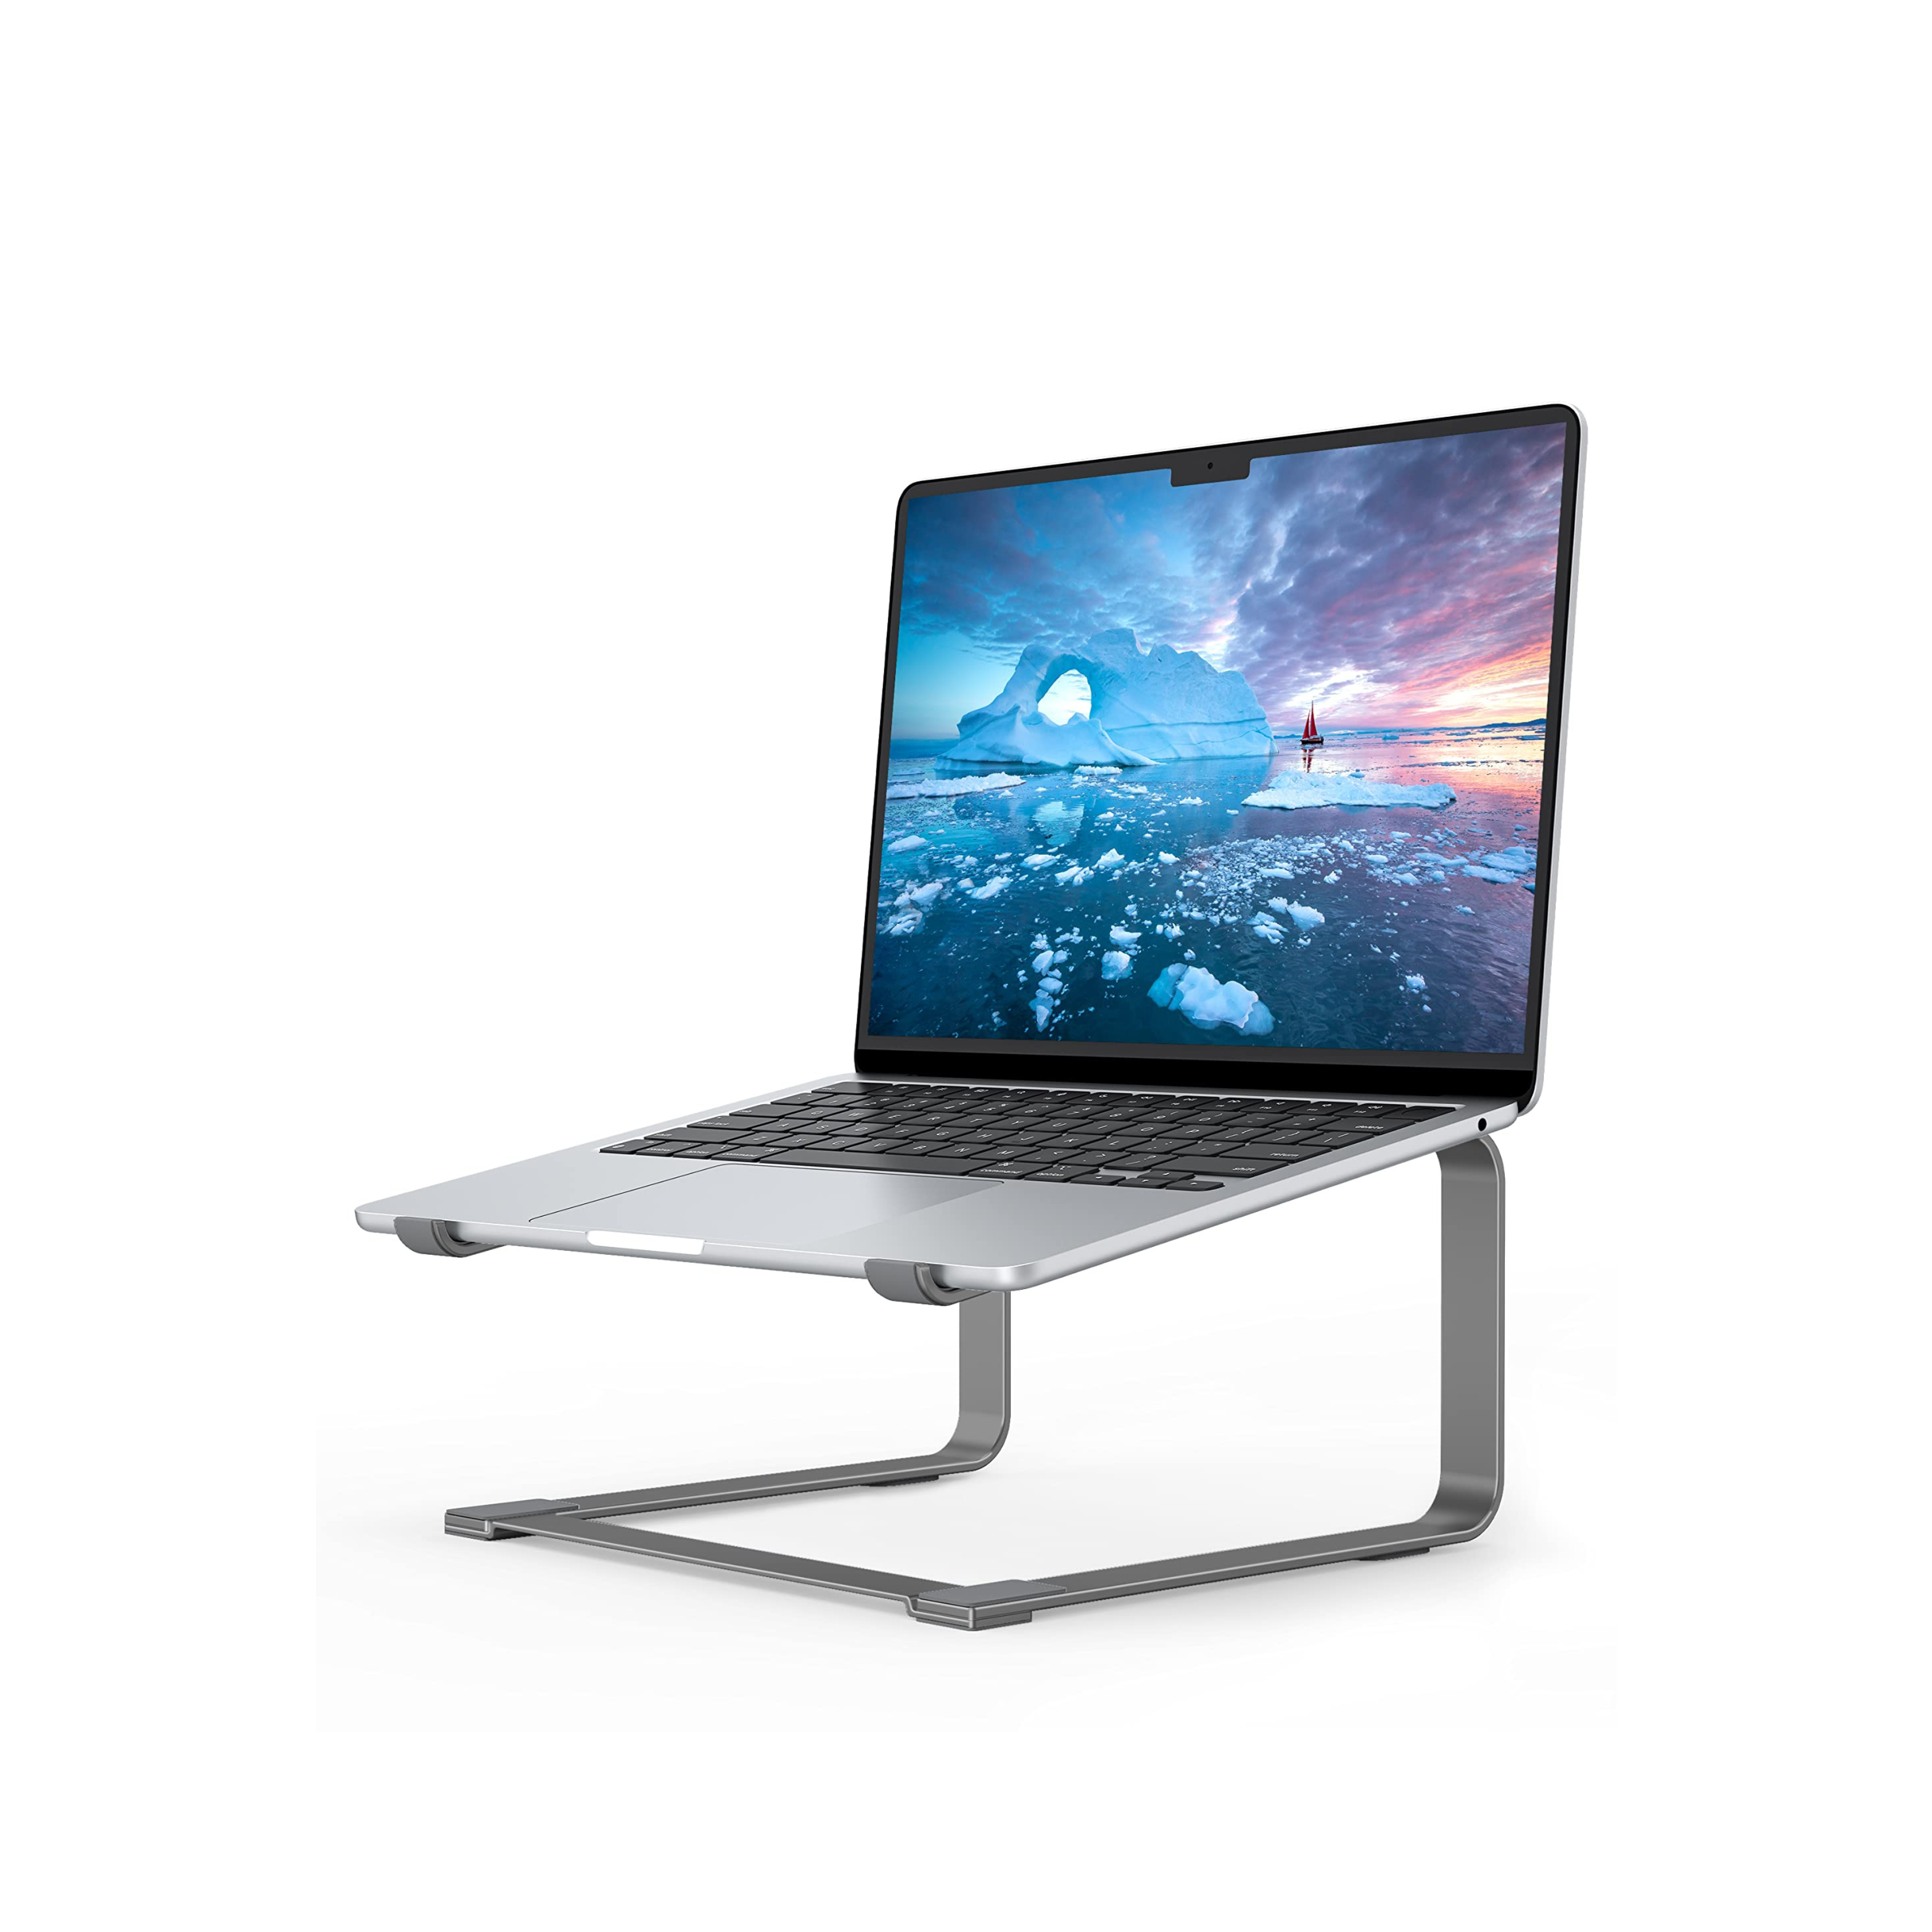 SOUNDANCE Laptop Stand for Desk, Metal Computer Riser, Heavy Stable PC Holder, Ergonomic Laptops Elevator for 12 to 17.3 Inches Notebook Computer, Grey